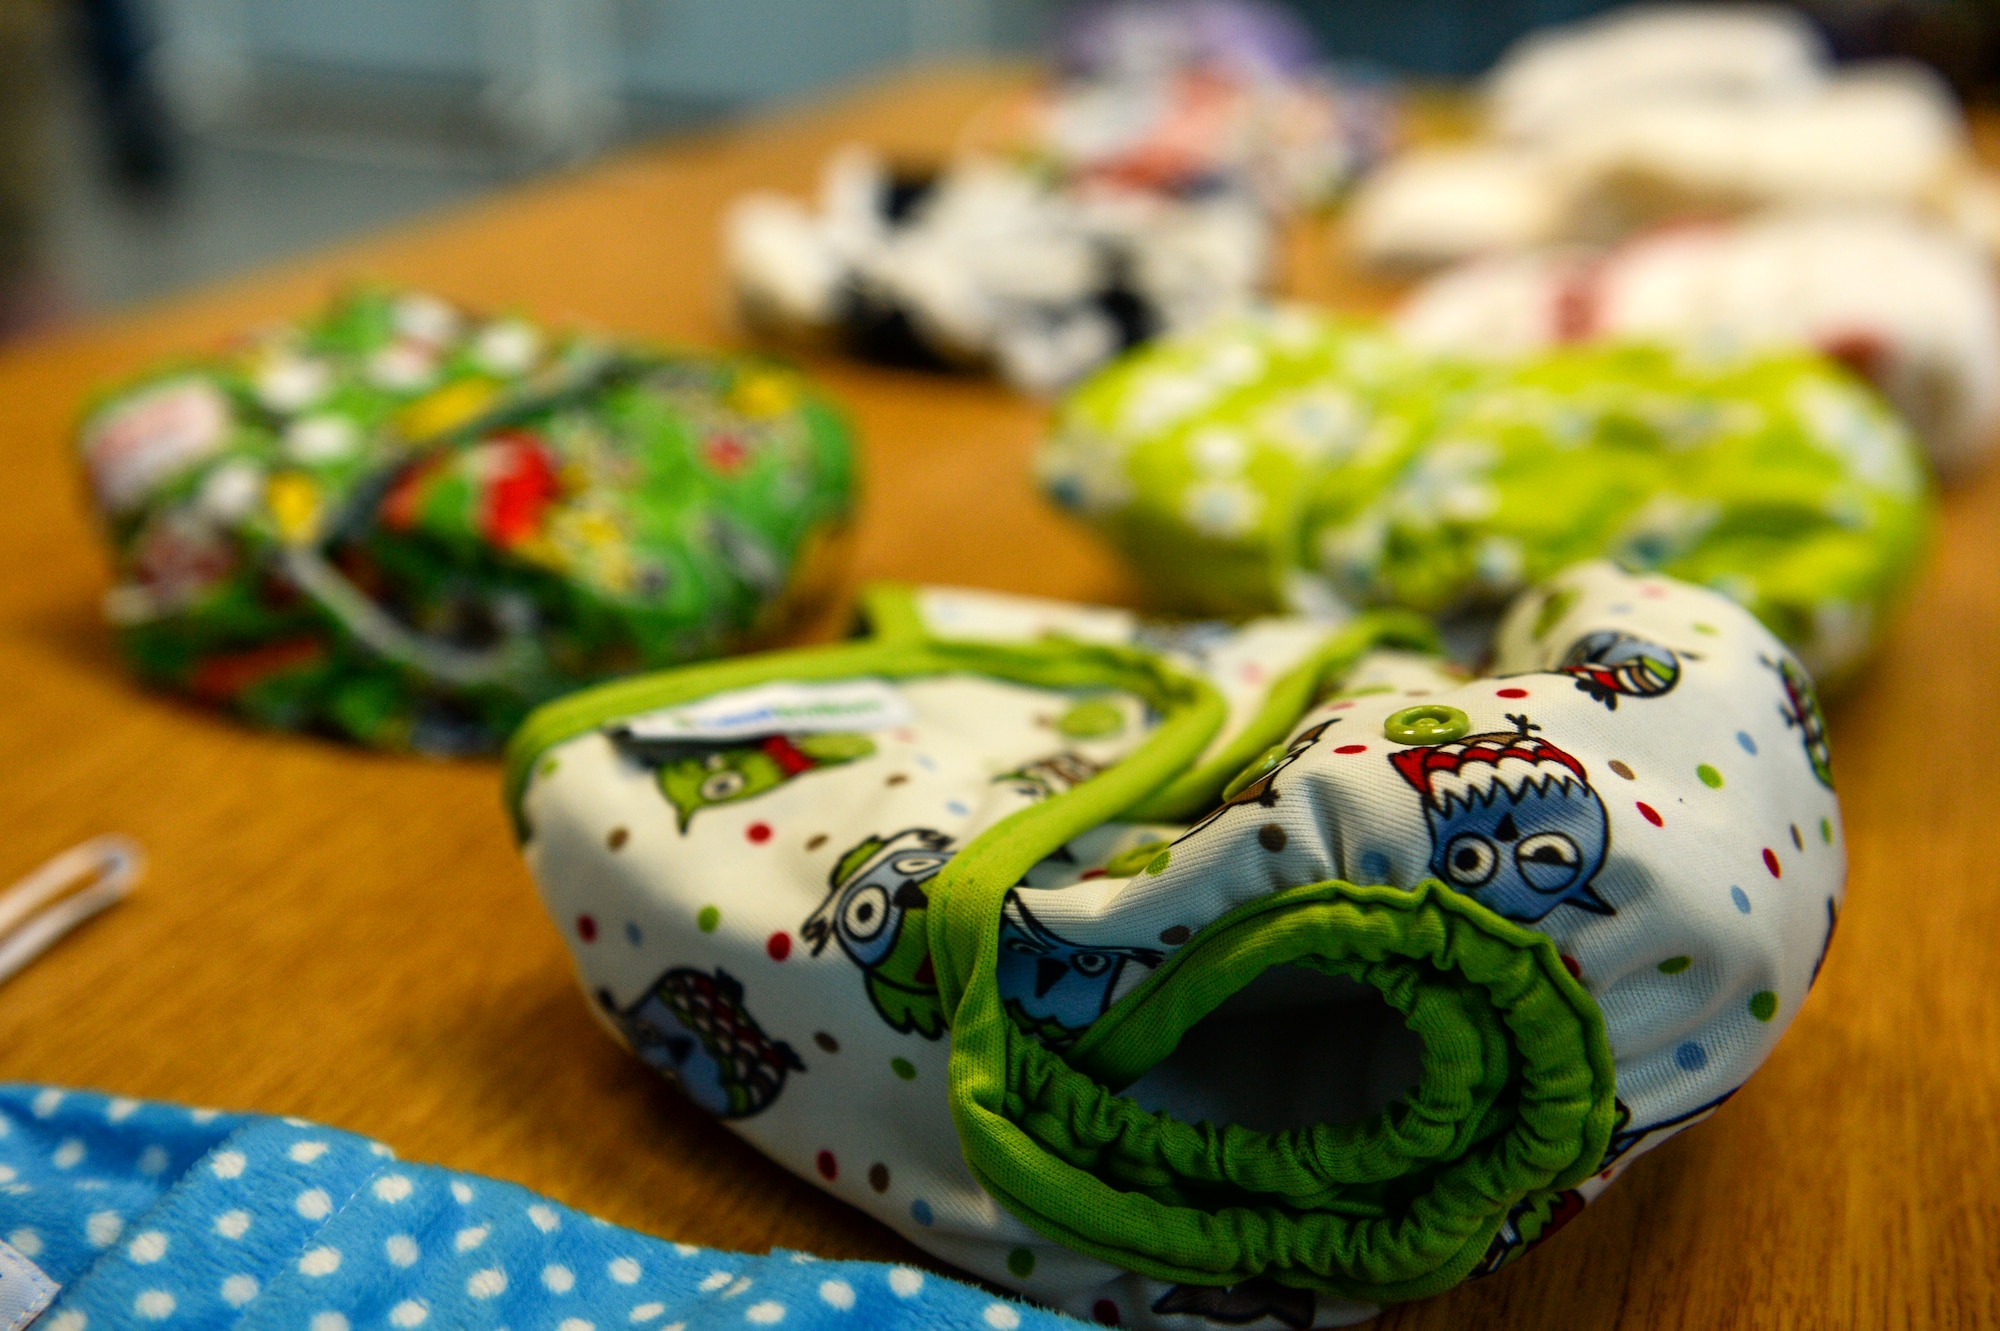 Cloth diapers are displayed on a table during the 2014 Great Cloth Diaper Change April 26, 2014, at Spangdahlem Air Base, Germany. One of the requirements for the event states that the children must be changed using a cloth diaper. (U.S. Air Force photo by Senior Airman Rusty Frank/Released)